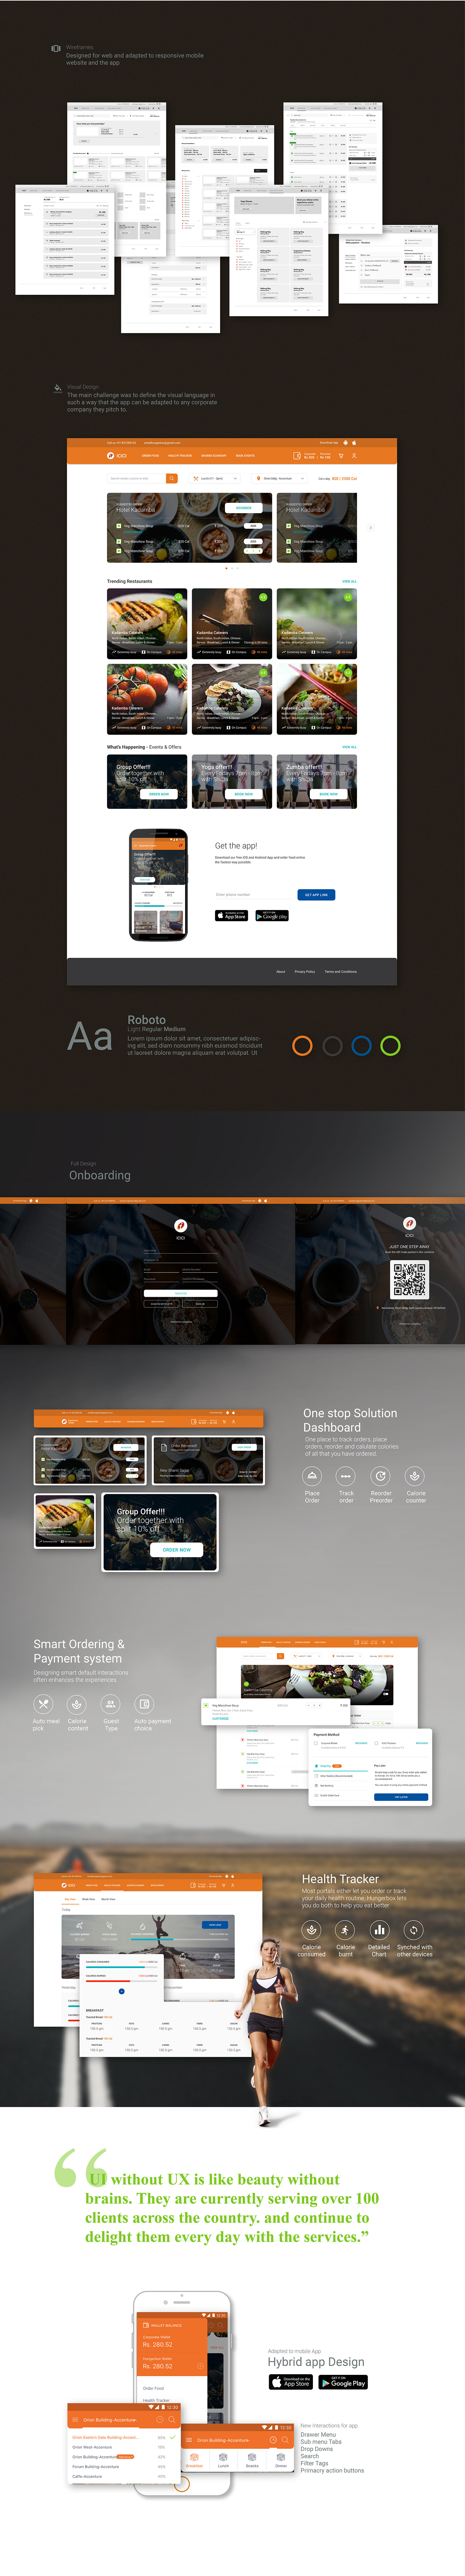 Food  catering Design Inspiration interface design User Experience Design corporate solutions